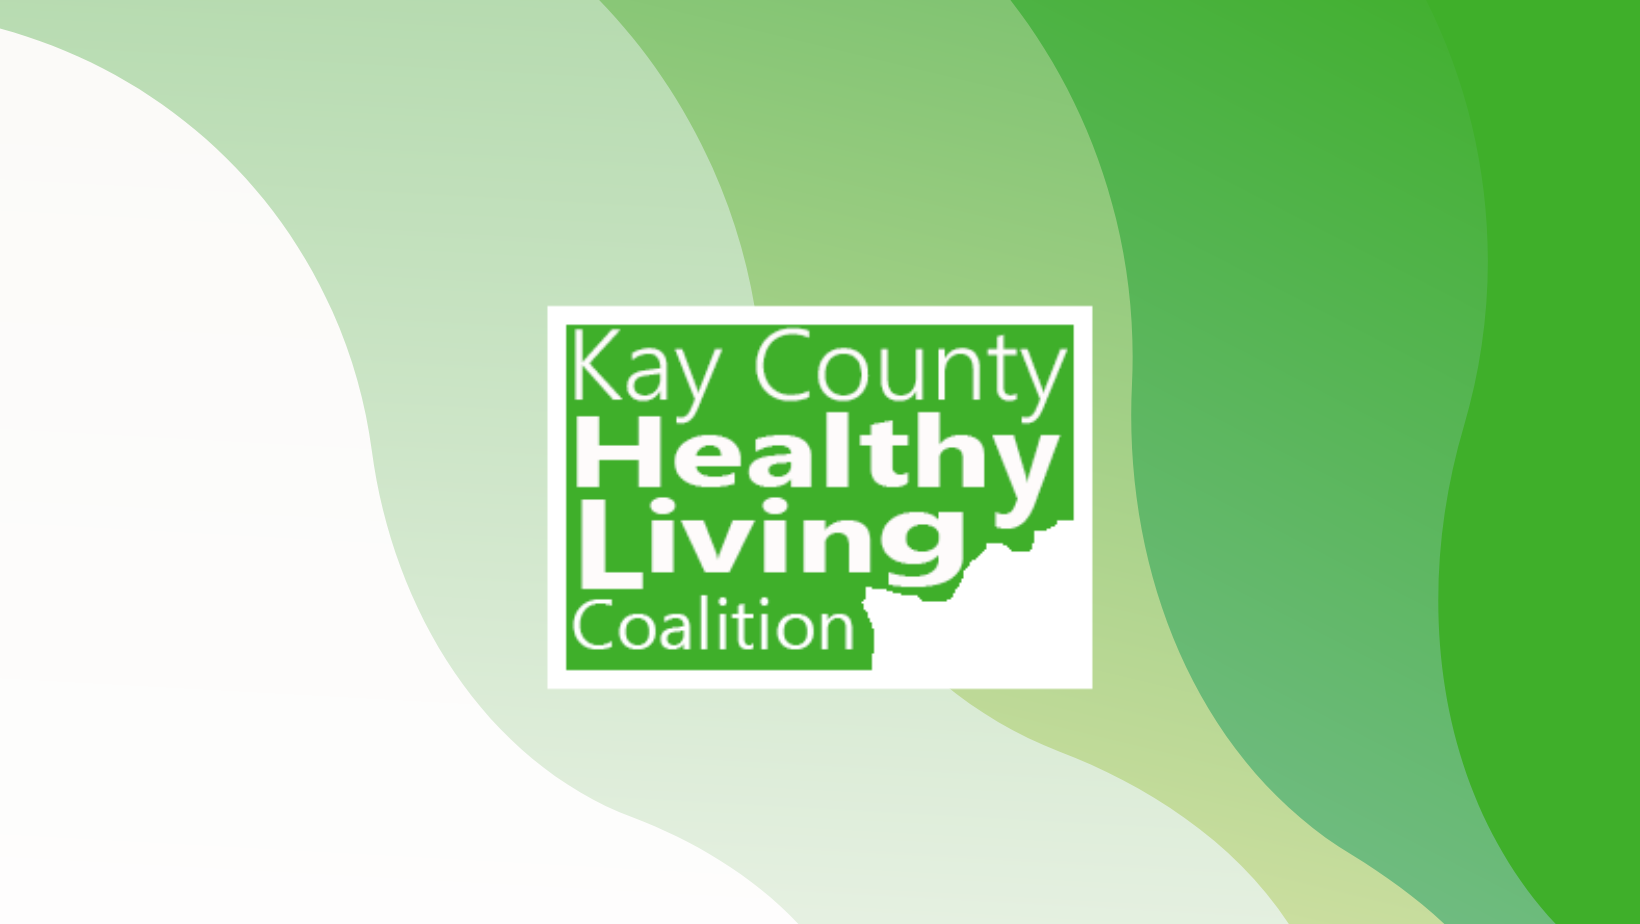 The Kay County Healthy Living Coalition and Ponca City Police Department Partner on Compliance Checks to Deter Tobacco and Alcohol Sales to Local Youth